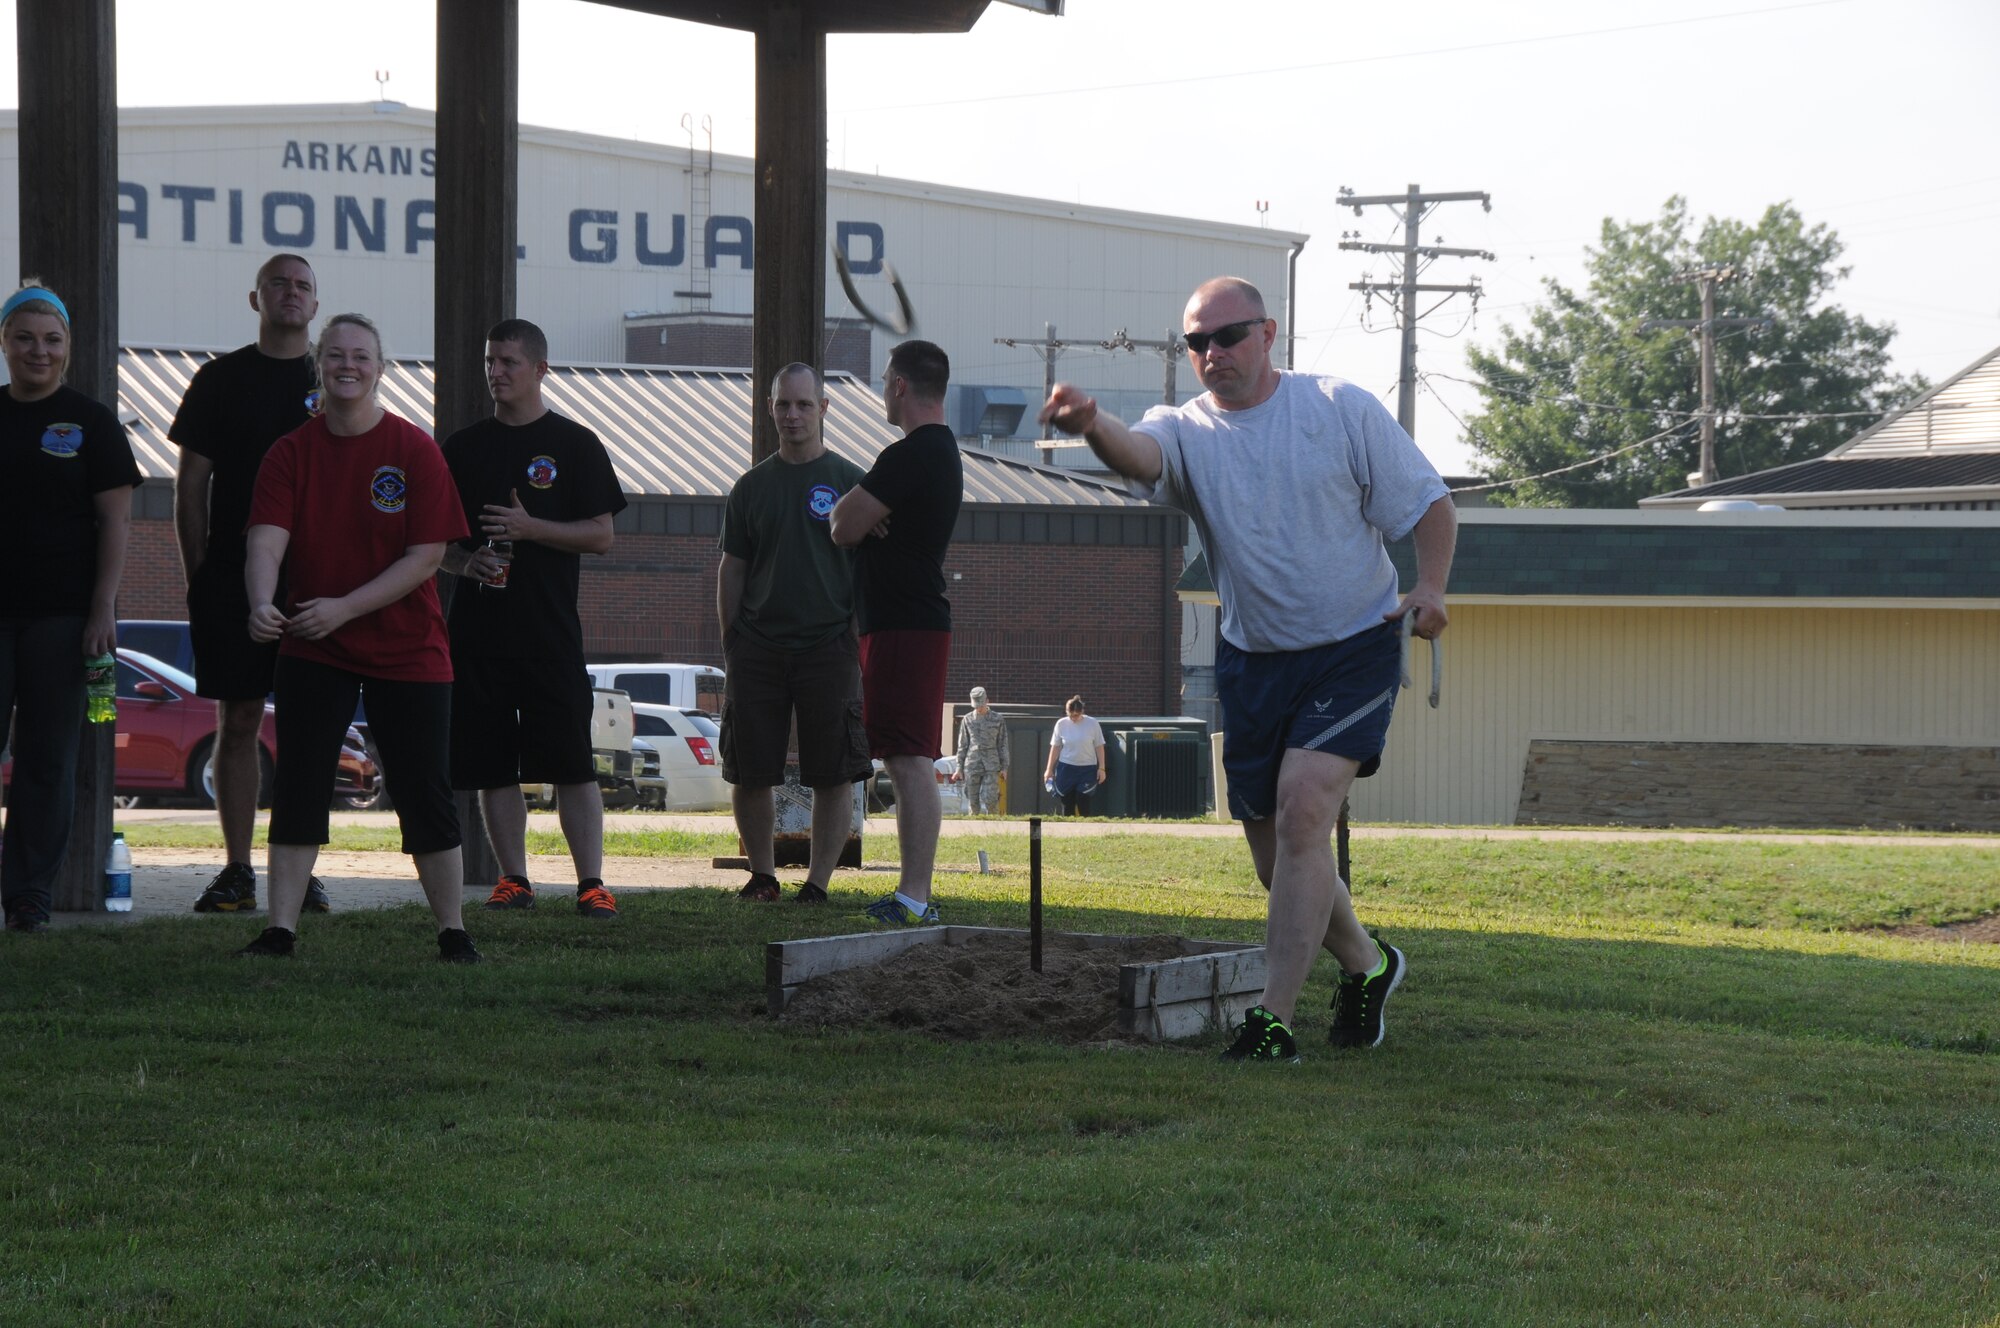 Airmen from the 188th Wing participate in a game of horseshoes during Wingman Day at the 188th Wing’s Ebbing Air National Guard Base Fort Smith, Arkansas, on Aug. 2, 2014. Events included volleyball, a free throw contest, a 1.5-mile run, fishing pole casting contest, golf chipping contest, golf cart driving course, and multiple fitness stations competition. (U.S. Air National Guard photo by Airman 1st Class Cody Martin/released)